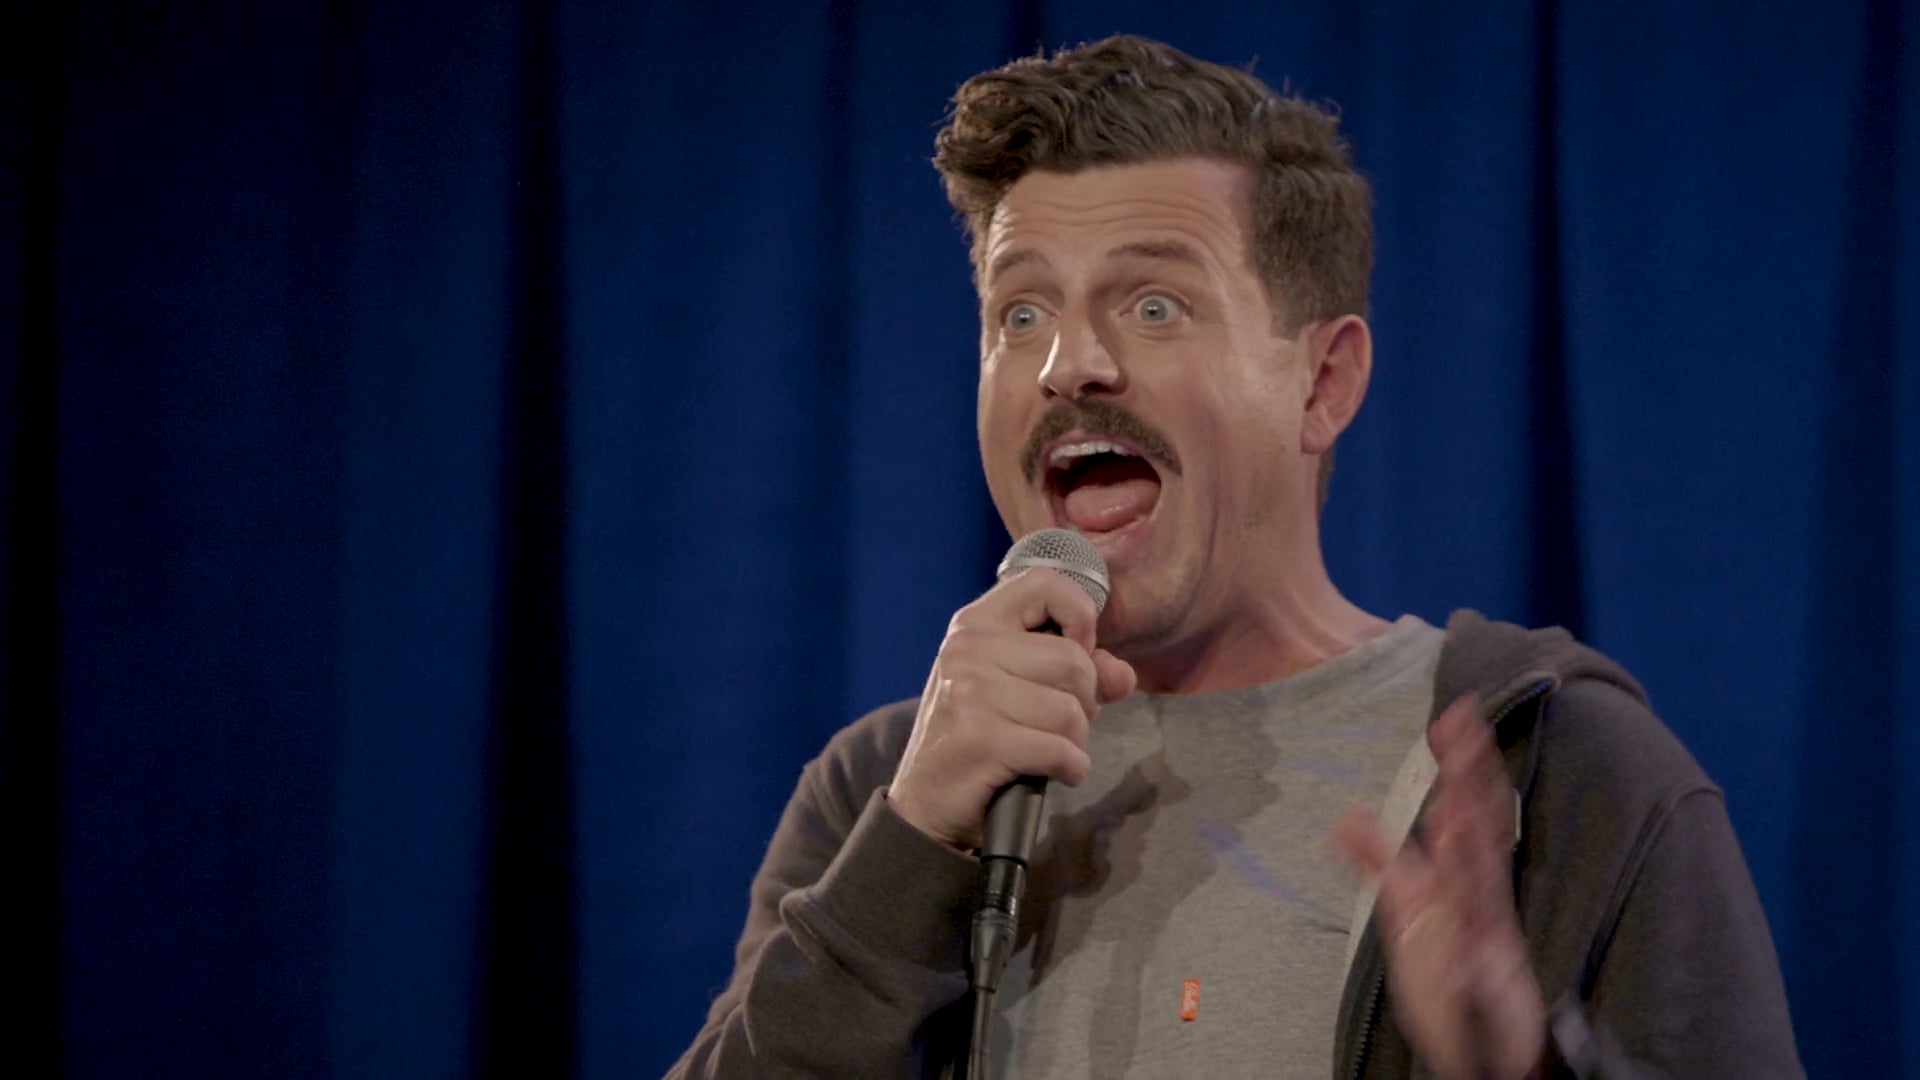 CHRIS FAIRBANKS-RESCUE CACTUS; A Stand Up Comedy Special (the Trailer)